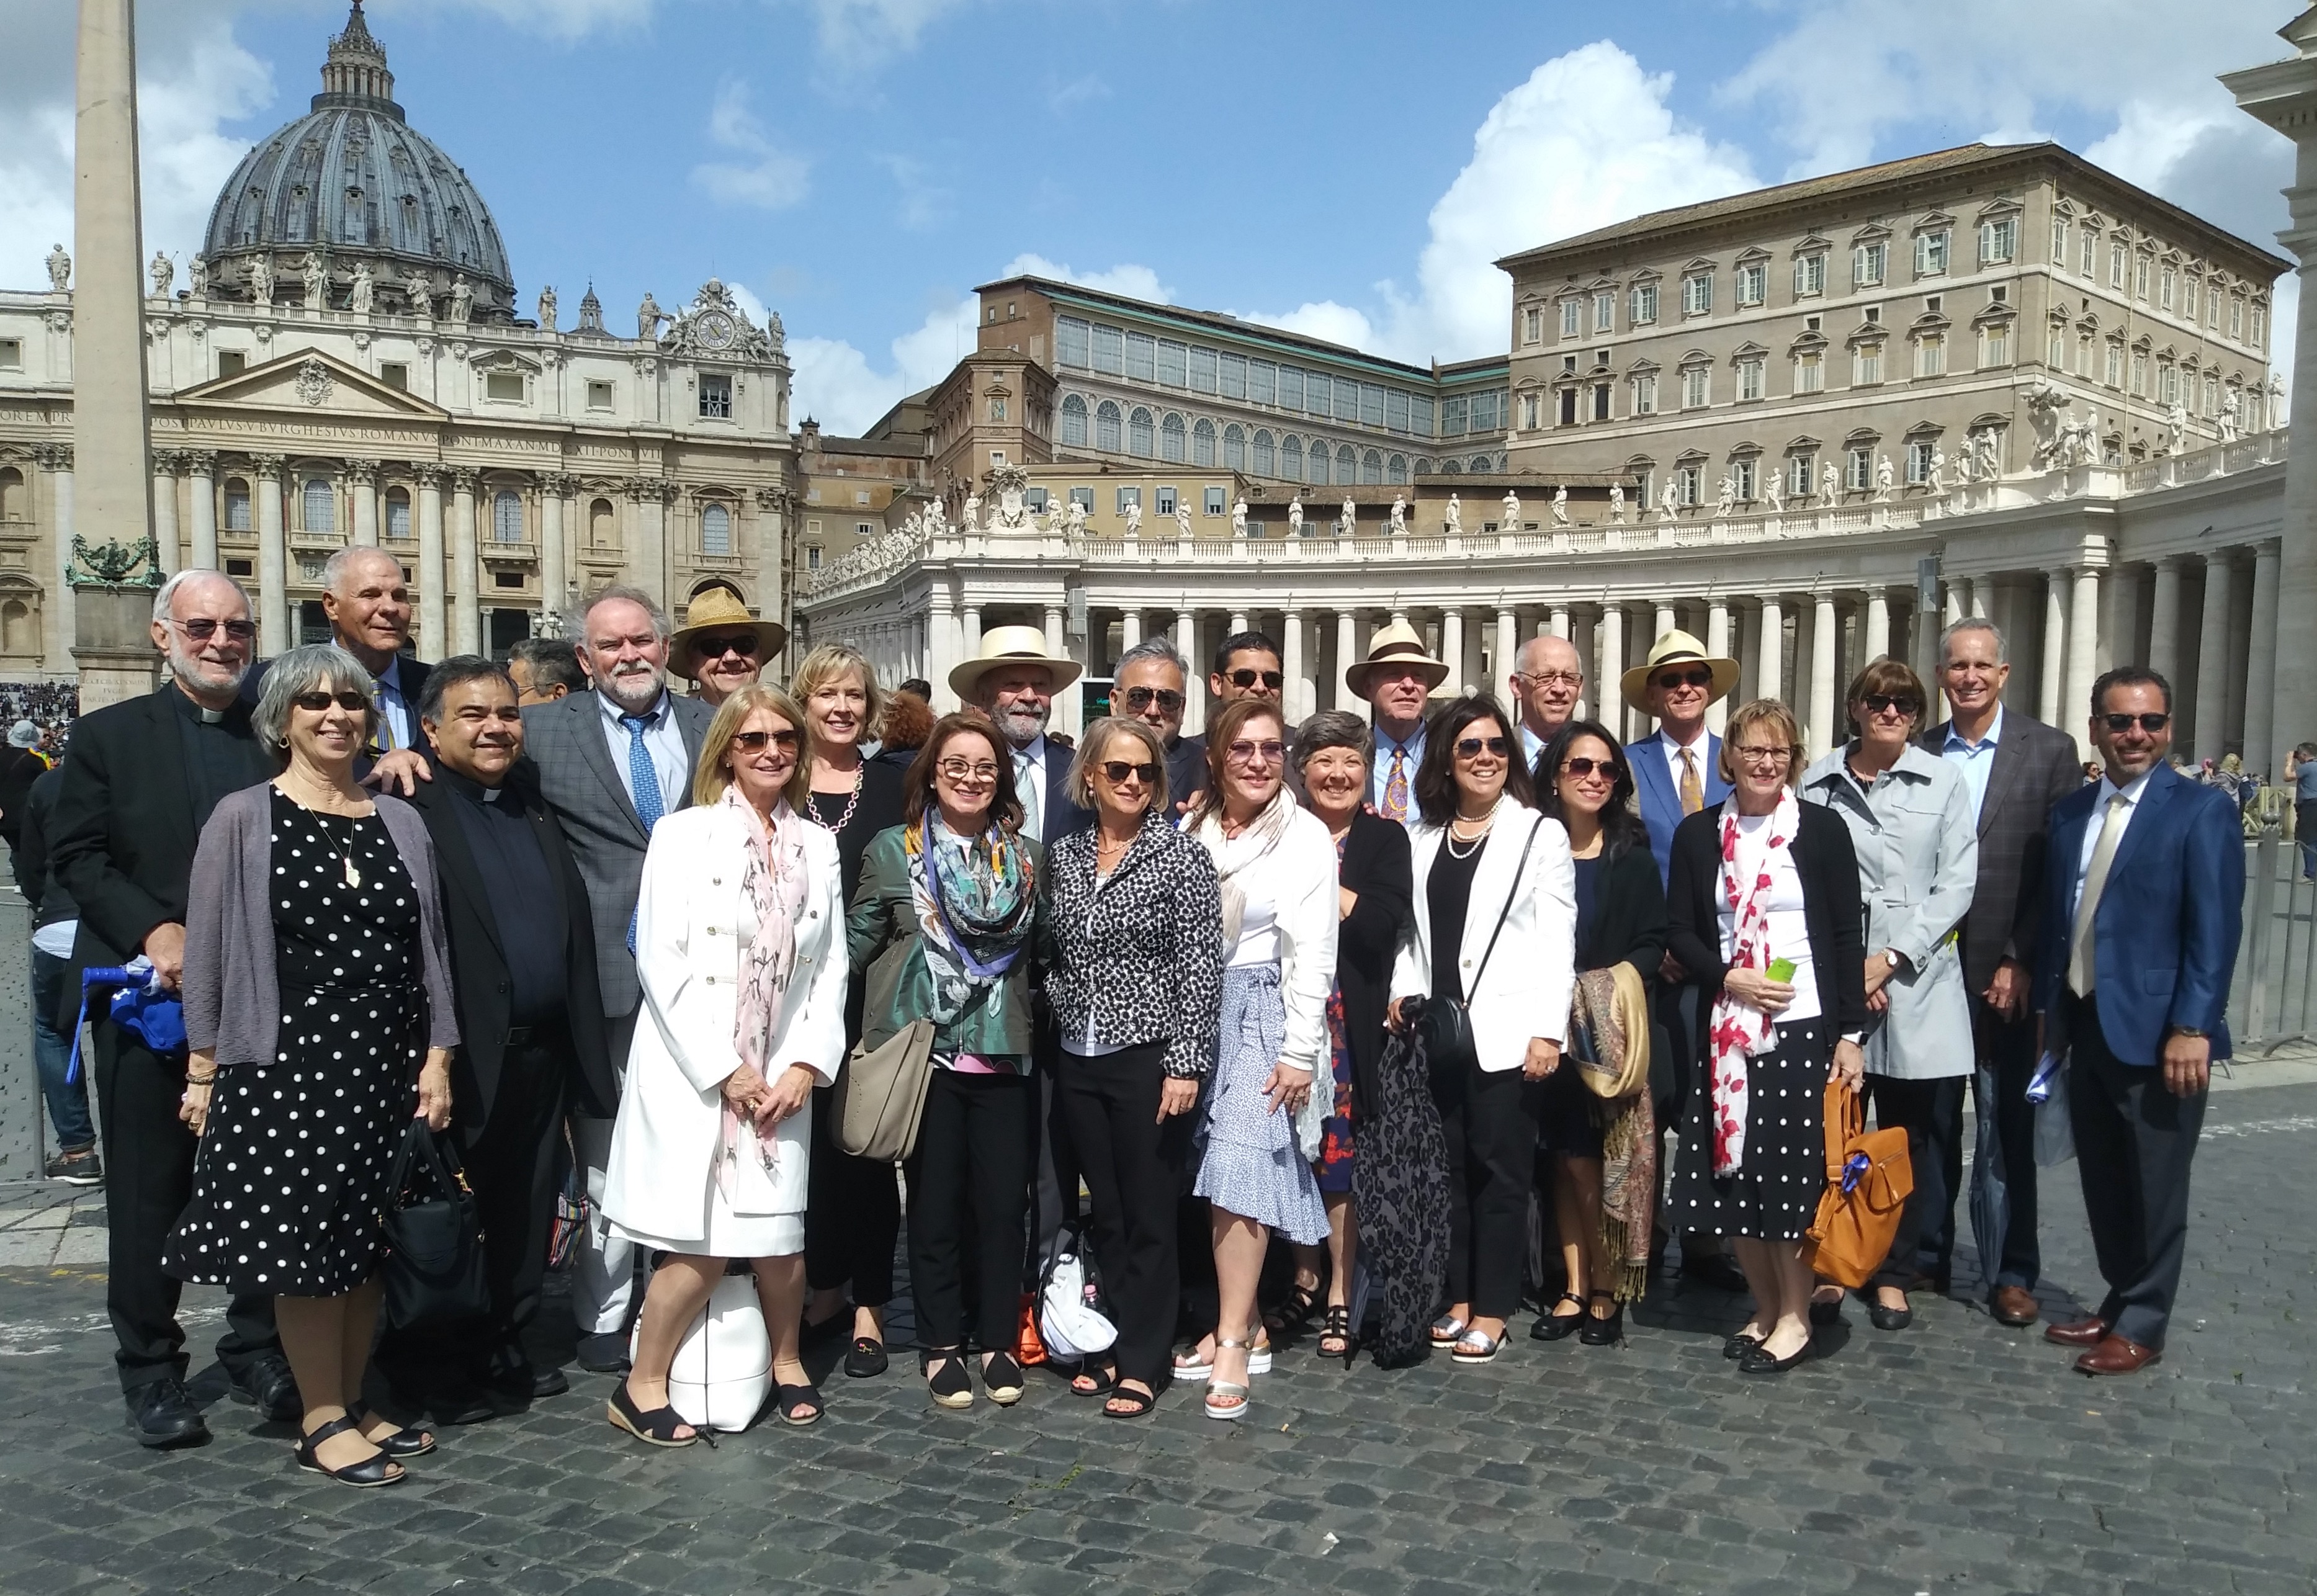 From Texas to Rome: Trustees of St. Mary's University discover connection with St. Benedict